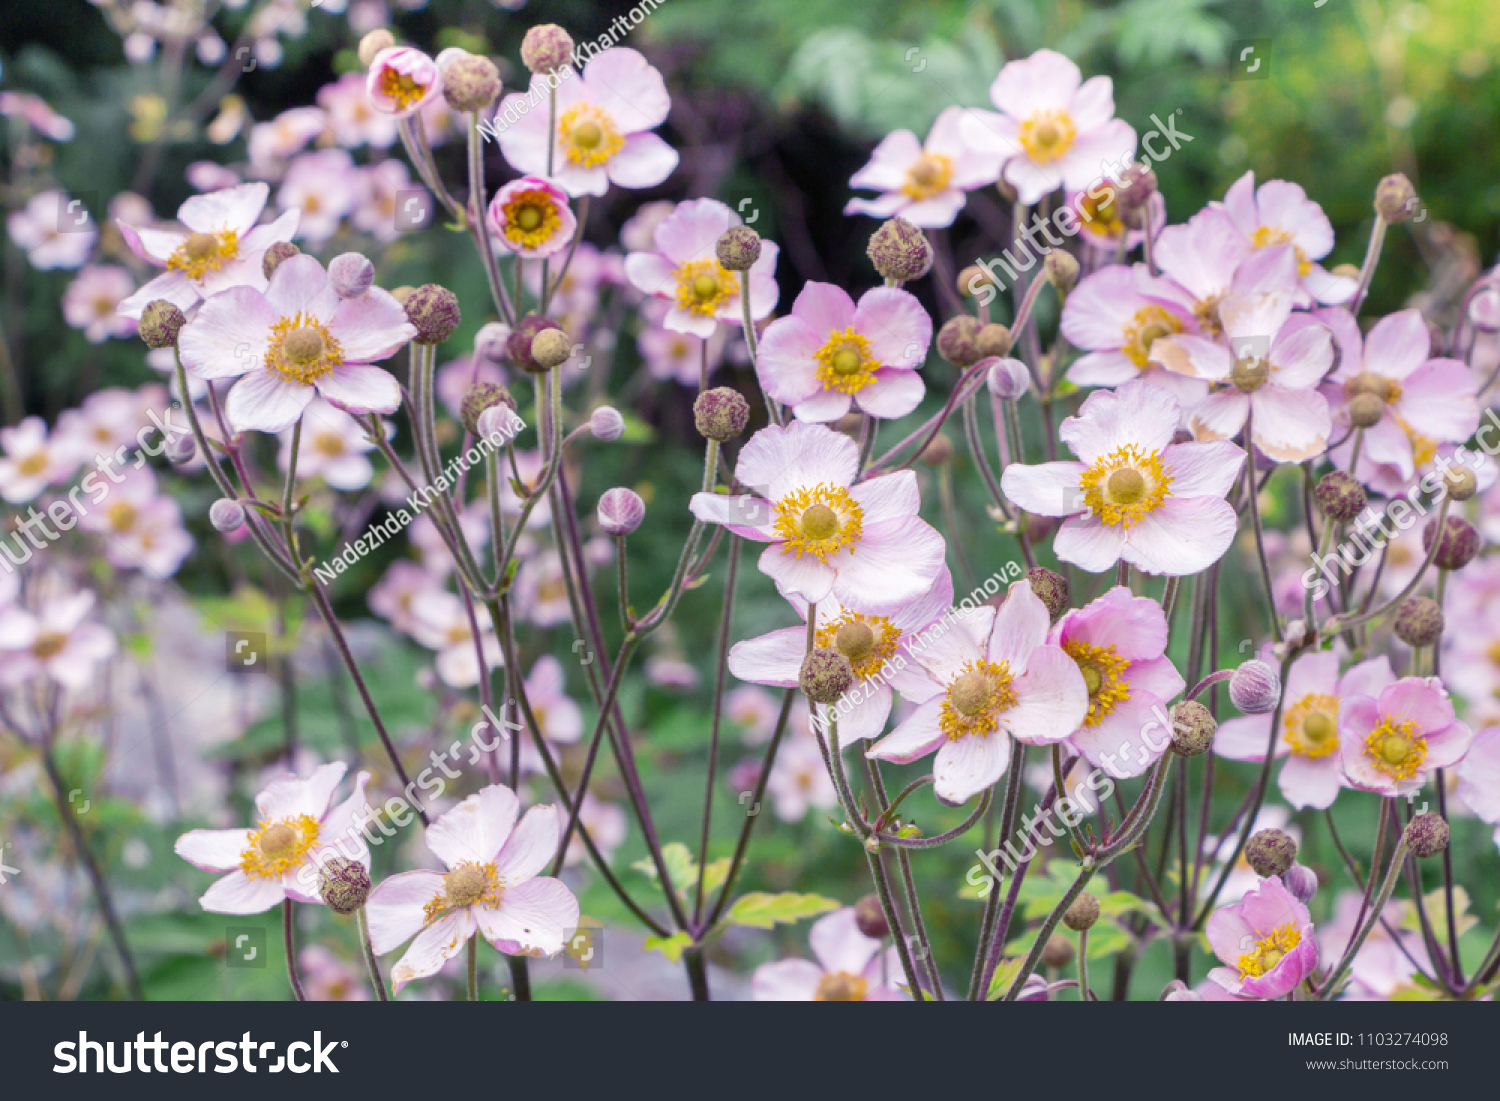 Anemone hupehensis. Commonly known as the Chinese anemone or Japanese anemone, thimbleweed, or windflower. Filled full frame picture. Floral natural delicate background. A lot of small pink flowers. #1103274098